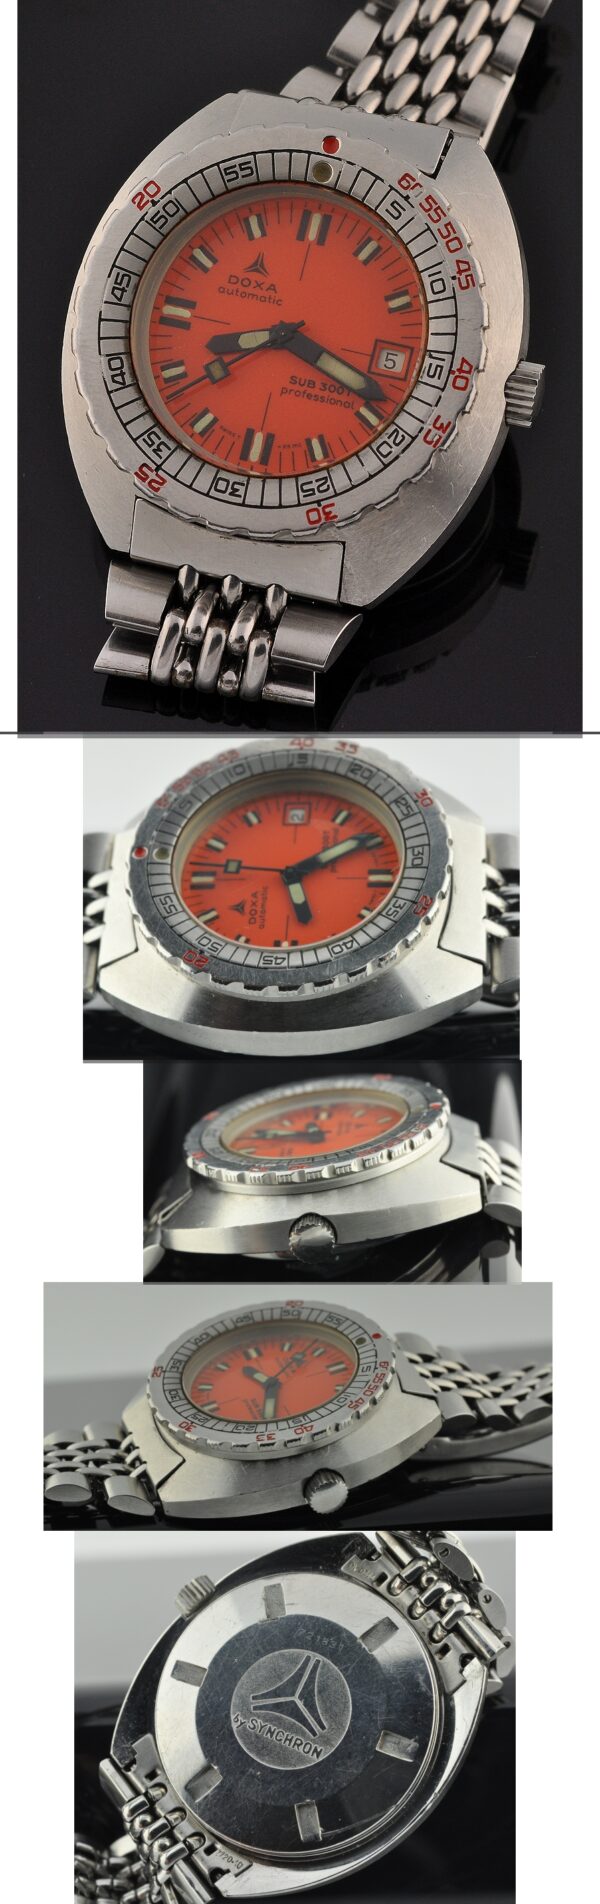 1970 Doxa Sub 300T Professional stainless steel dive watch with original sapphire crystal, beads-of-rice bracelet, stretch buckle, and dial.